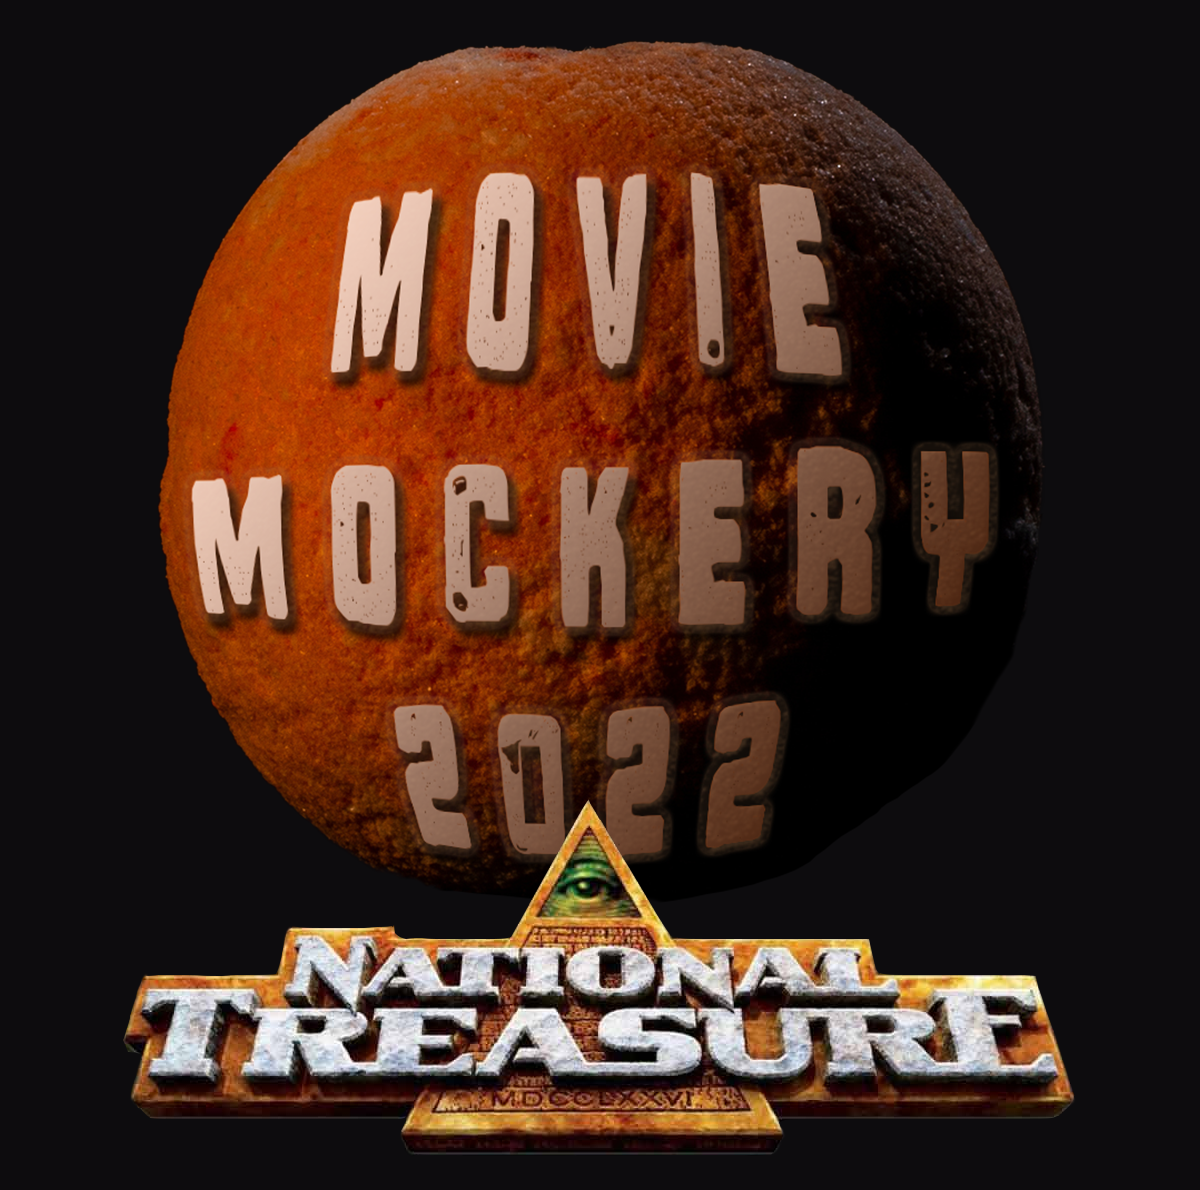 Text "Movie Mockery 2022" over a red planet with the logo for the movie "National Treasure" underneath.